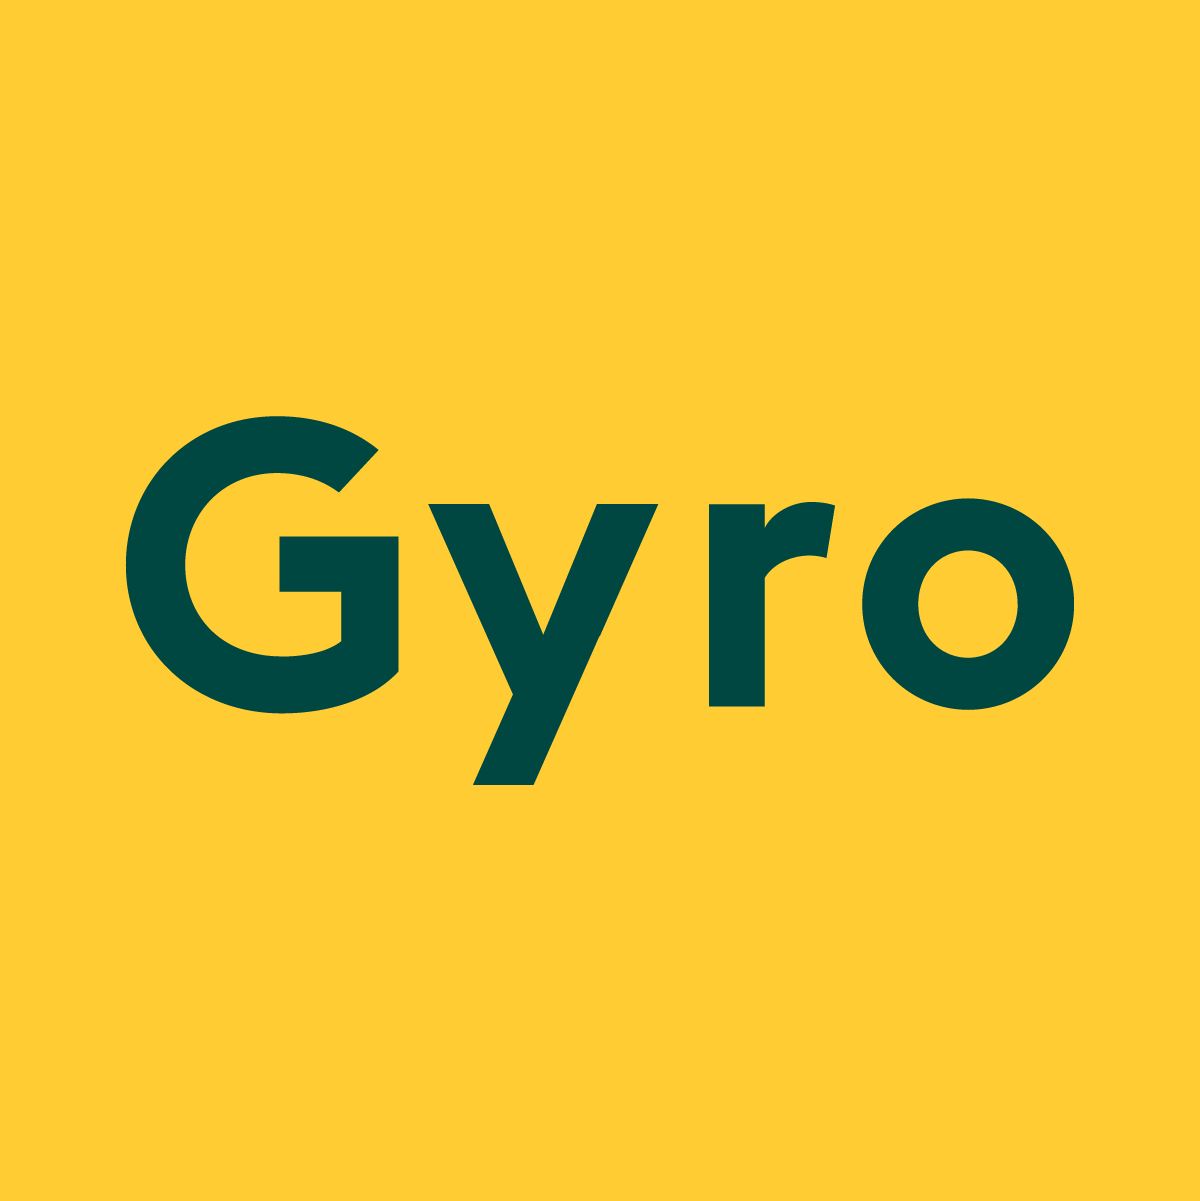 Gyro Logo - We accelerate people, cultures and brands